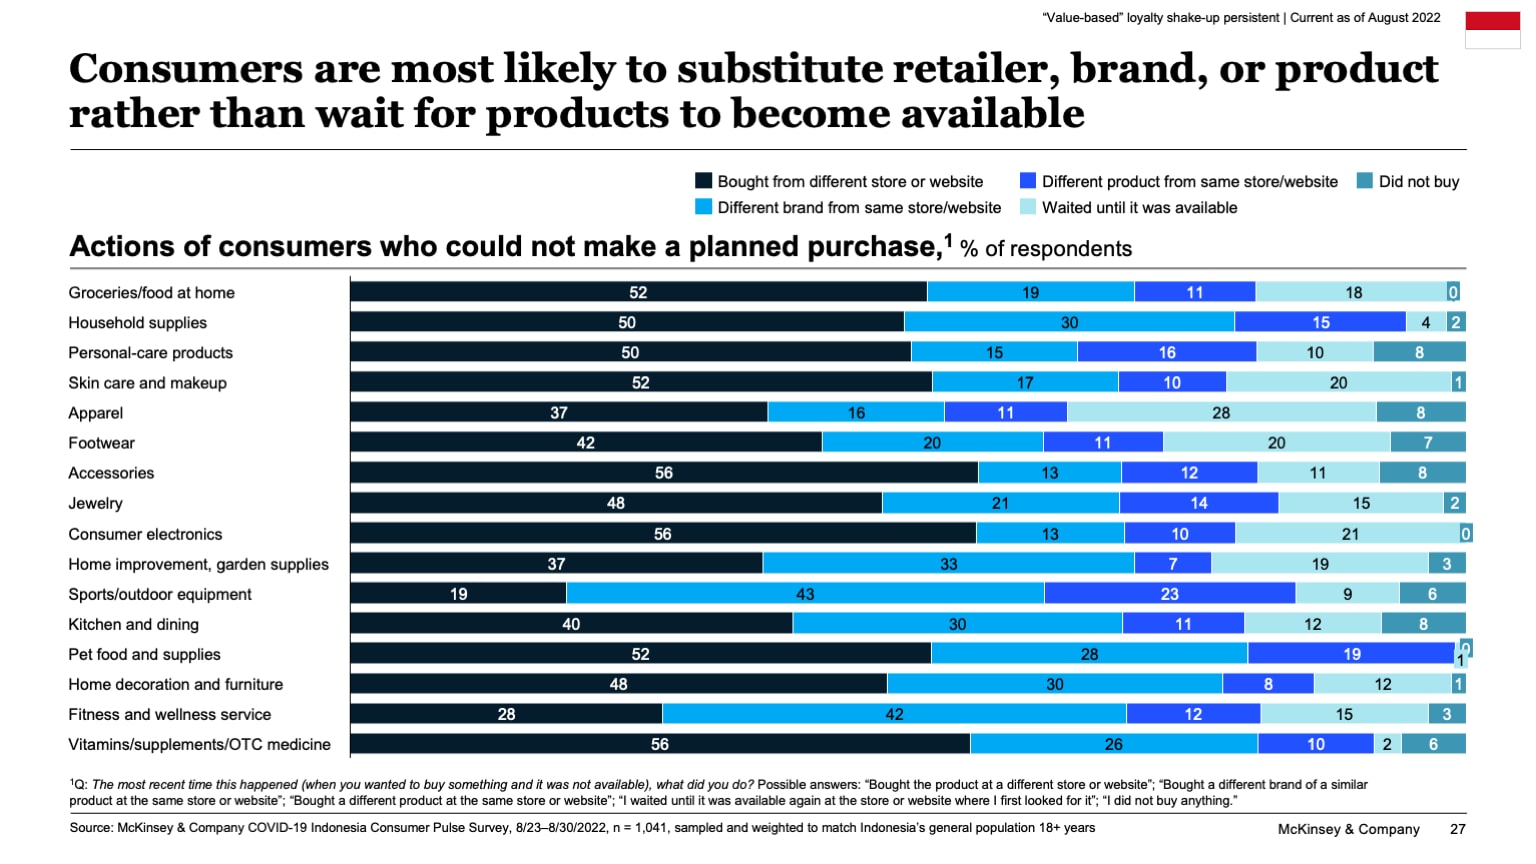 Consumers are most likely to substitute retailer, brand, or product rather than wait for products to become available